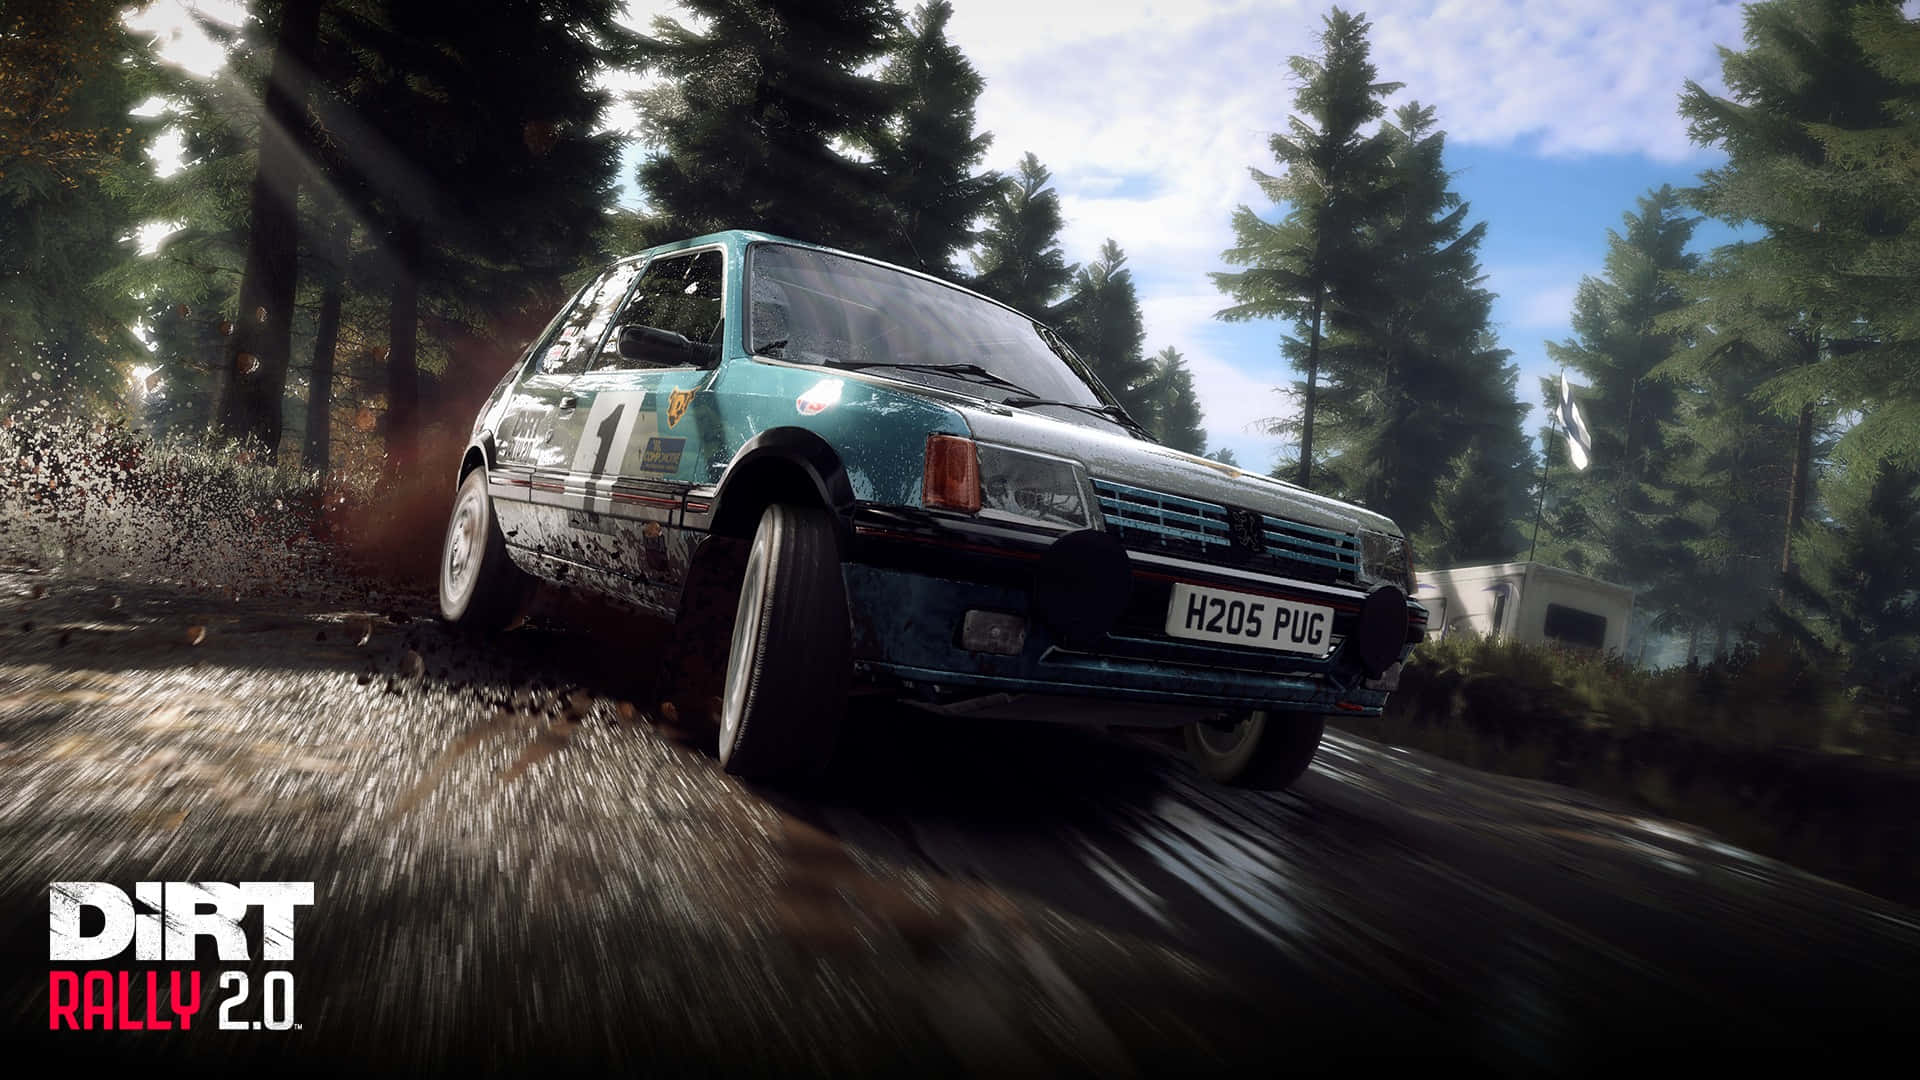 Conquer the Dirt Rally Track with Skill and Speed